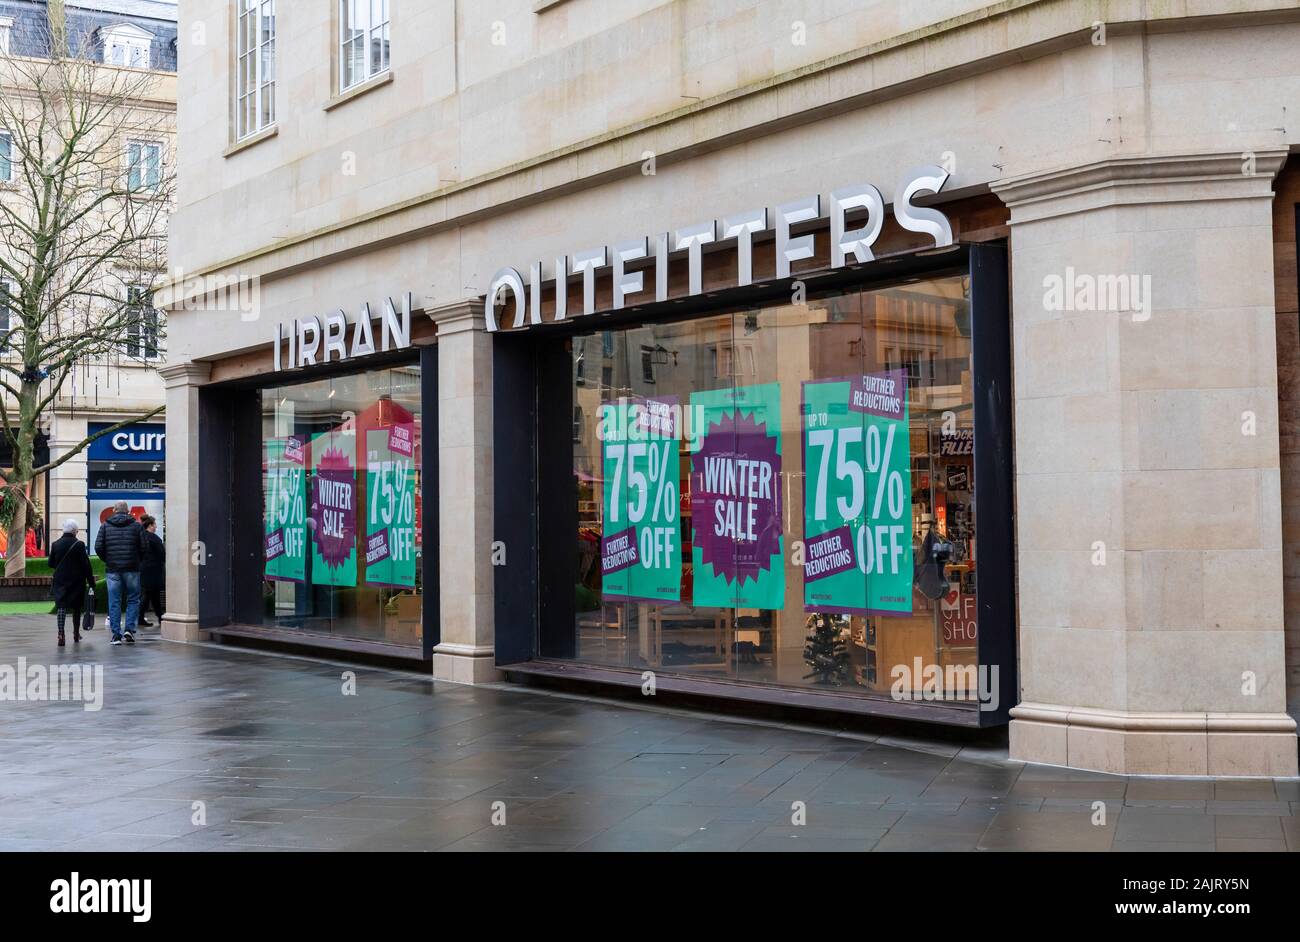 Urban Outfitters January Sale with up ...